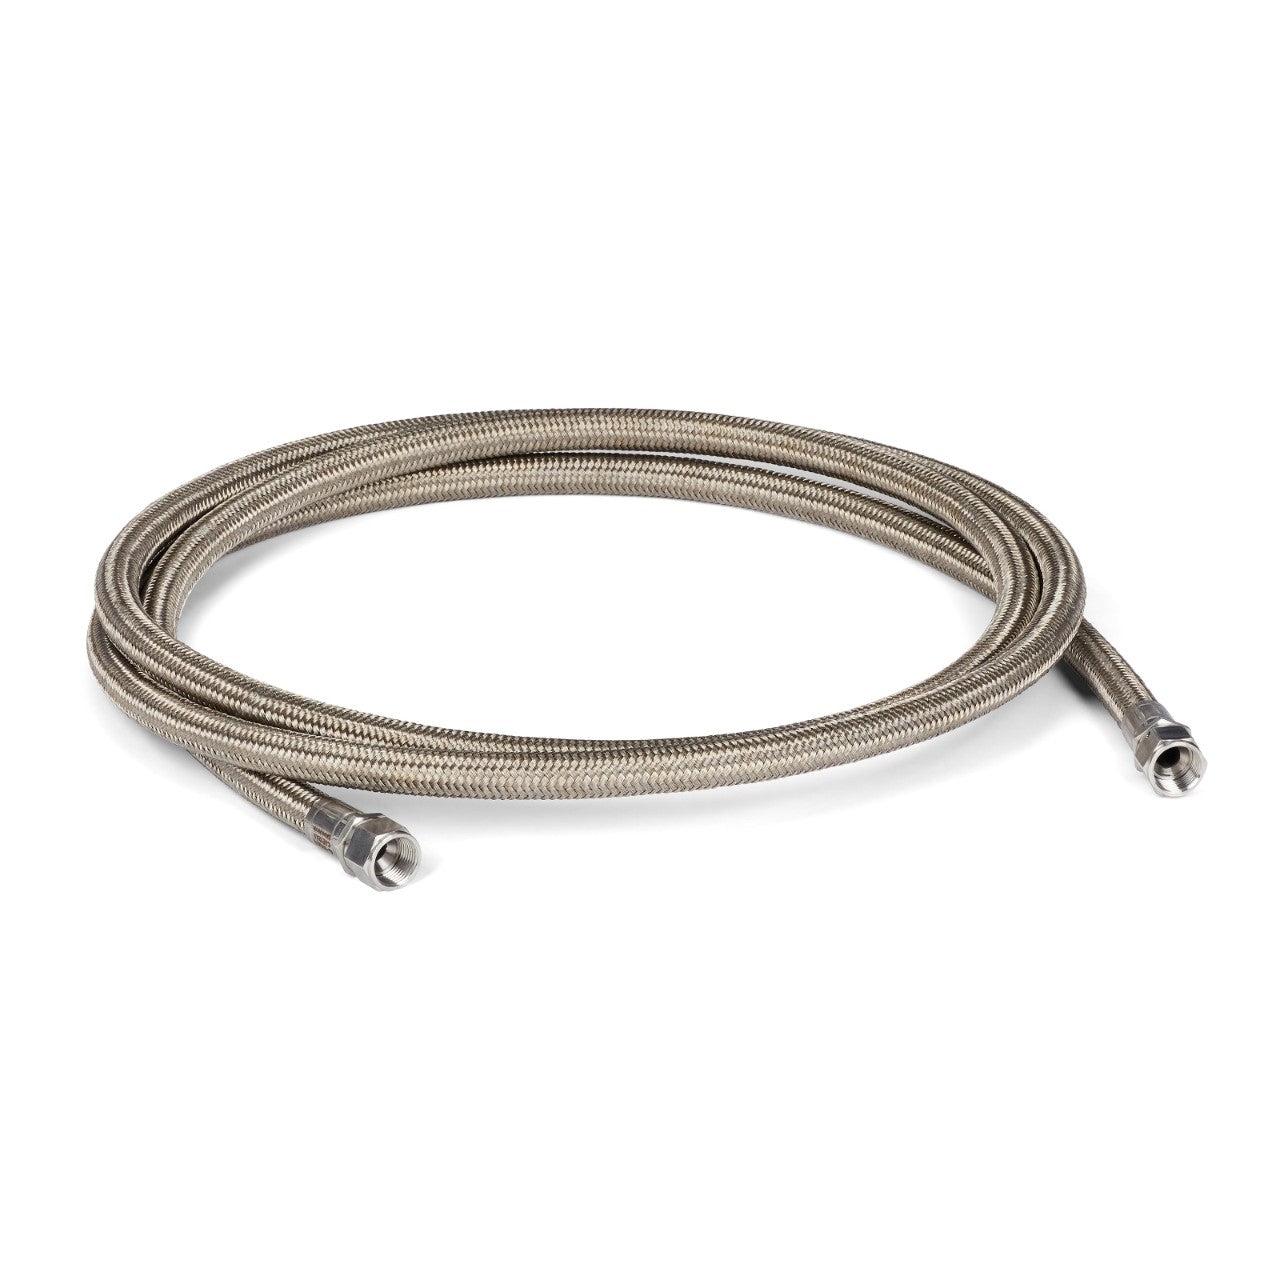 10 ft. (3.0 M) Stainless Steel Braided PTFE Ambient Hose,  No. 12 (0.617 in. / 15.7 mm ID)